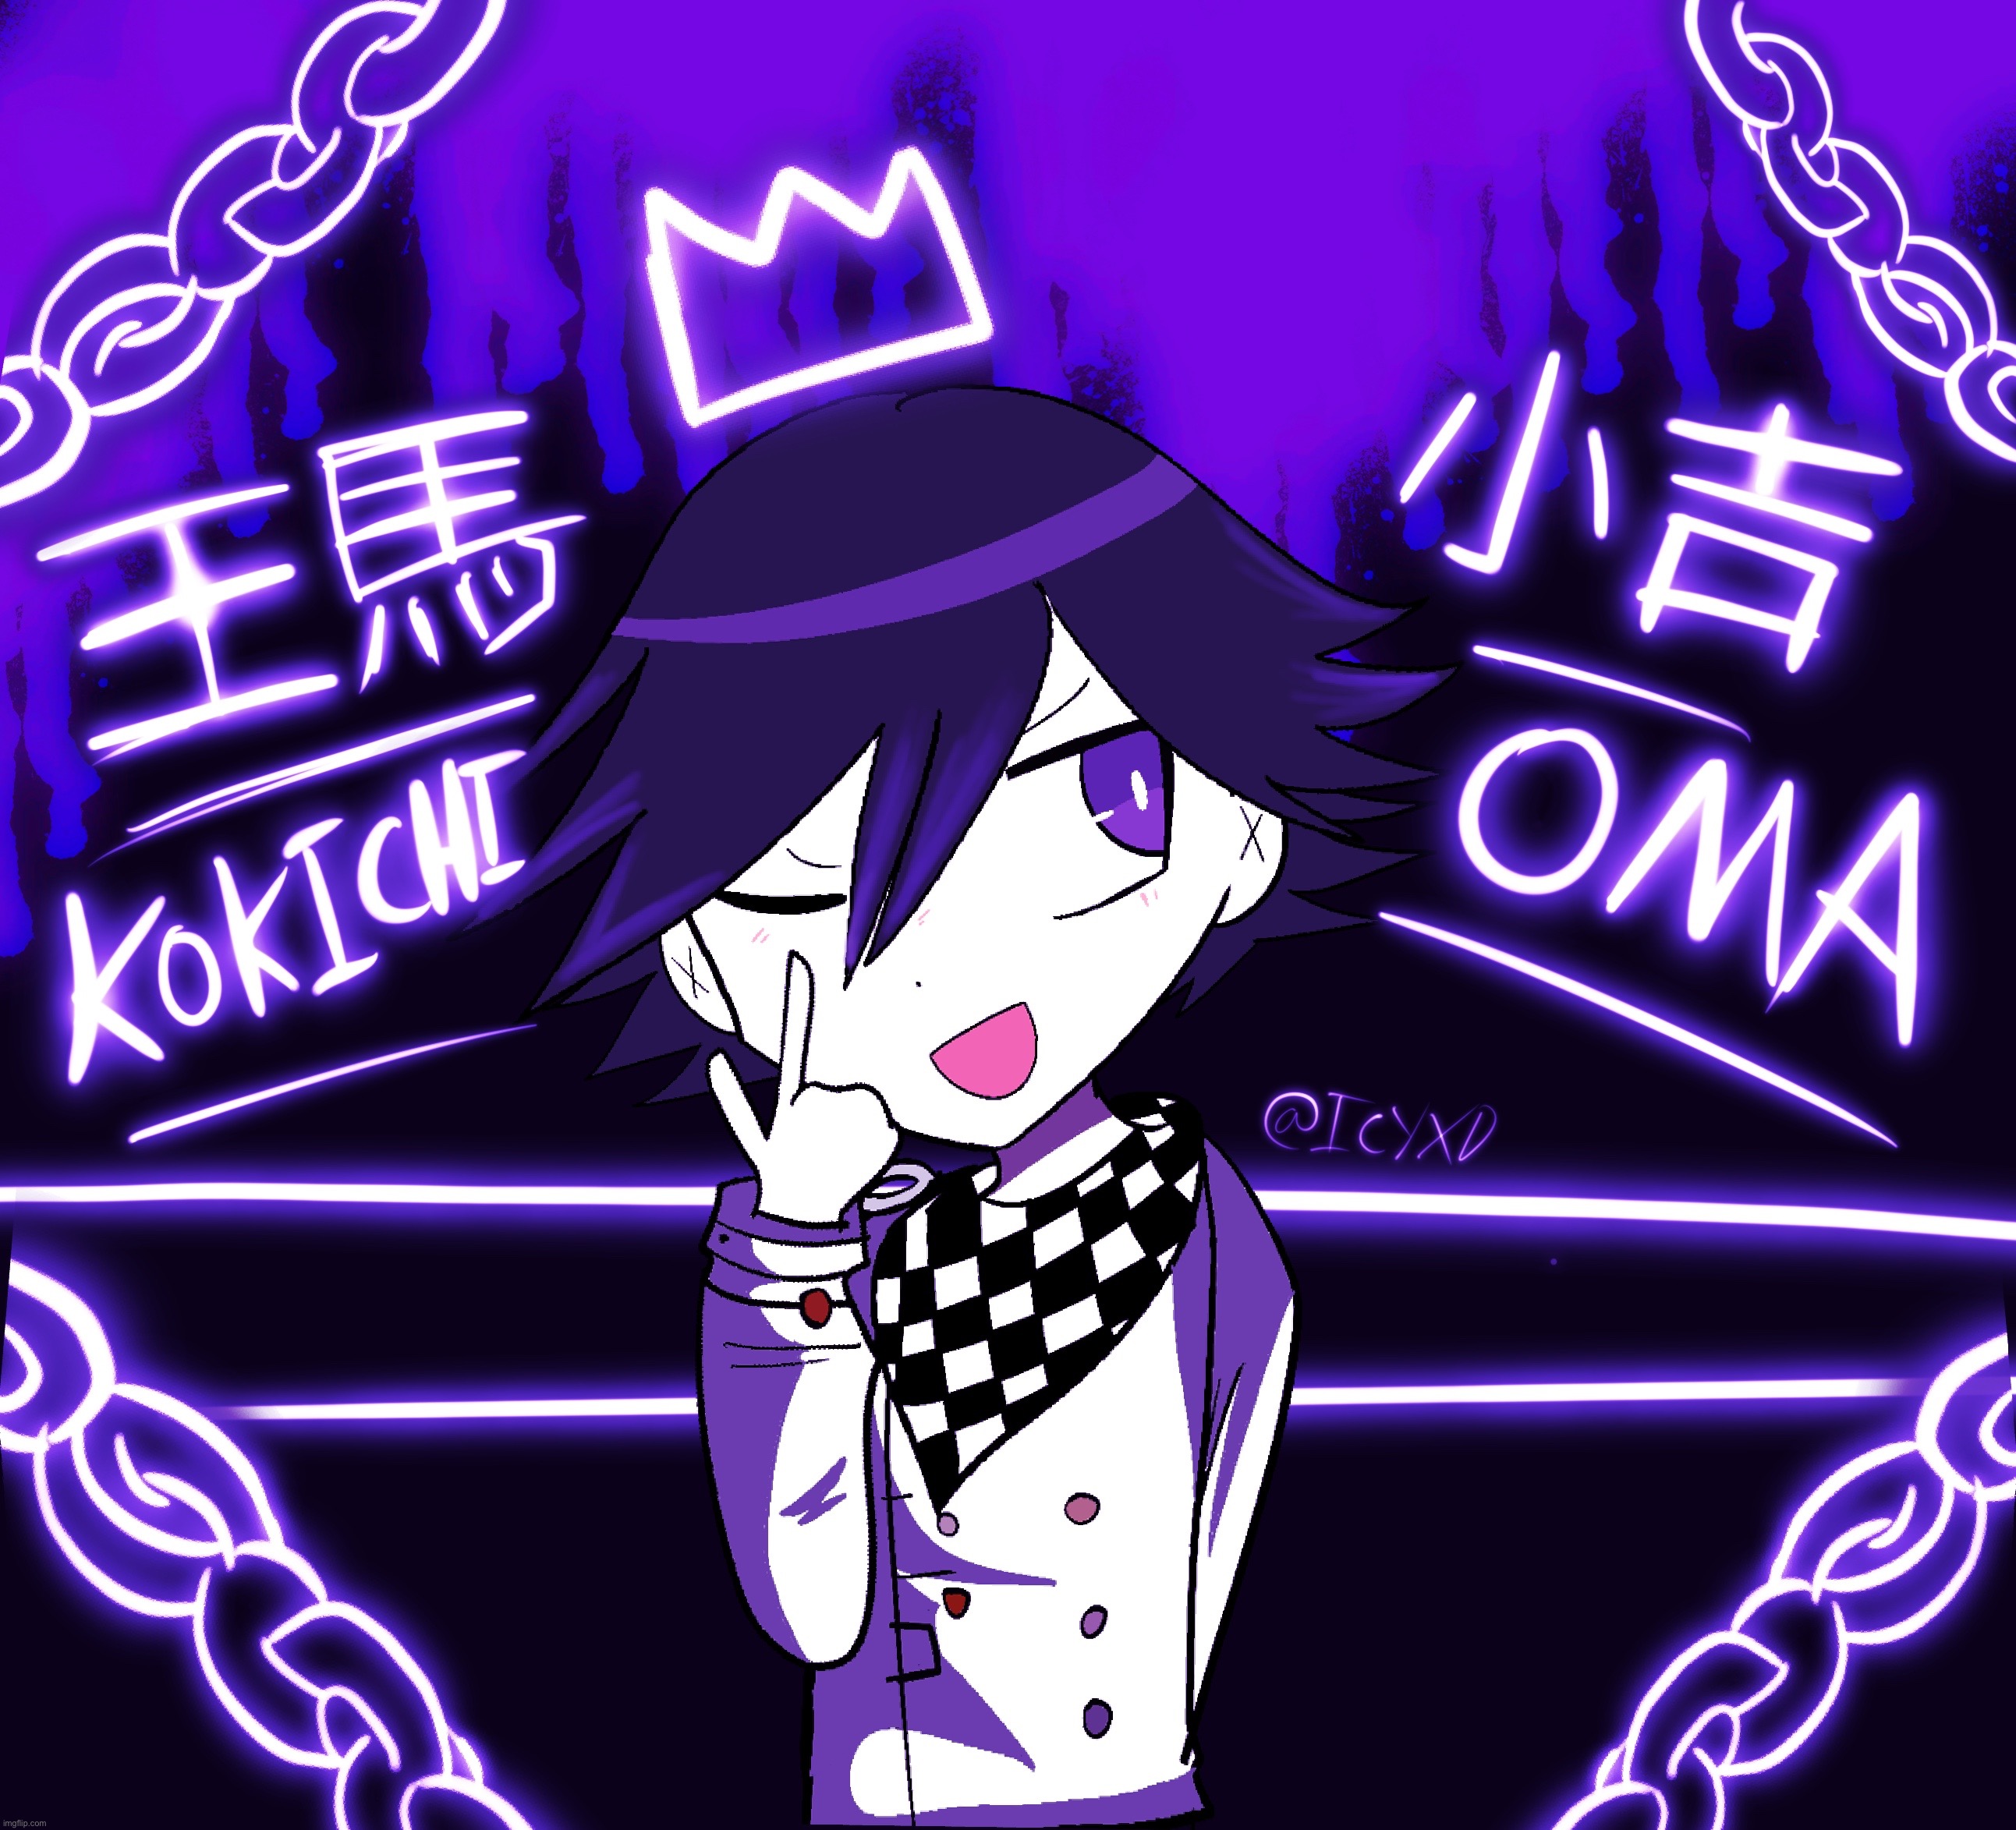 Kokichi Oma Wallpaper (will post iPhone edition in comments later) | image tagged in kokichi oma,danganronpa | made w/ Imgflip meme maker